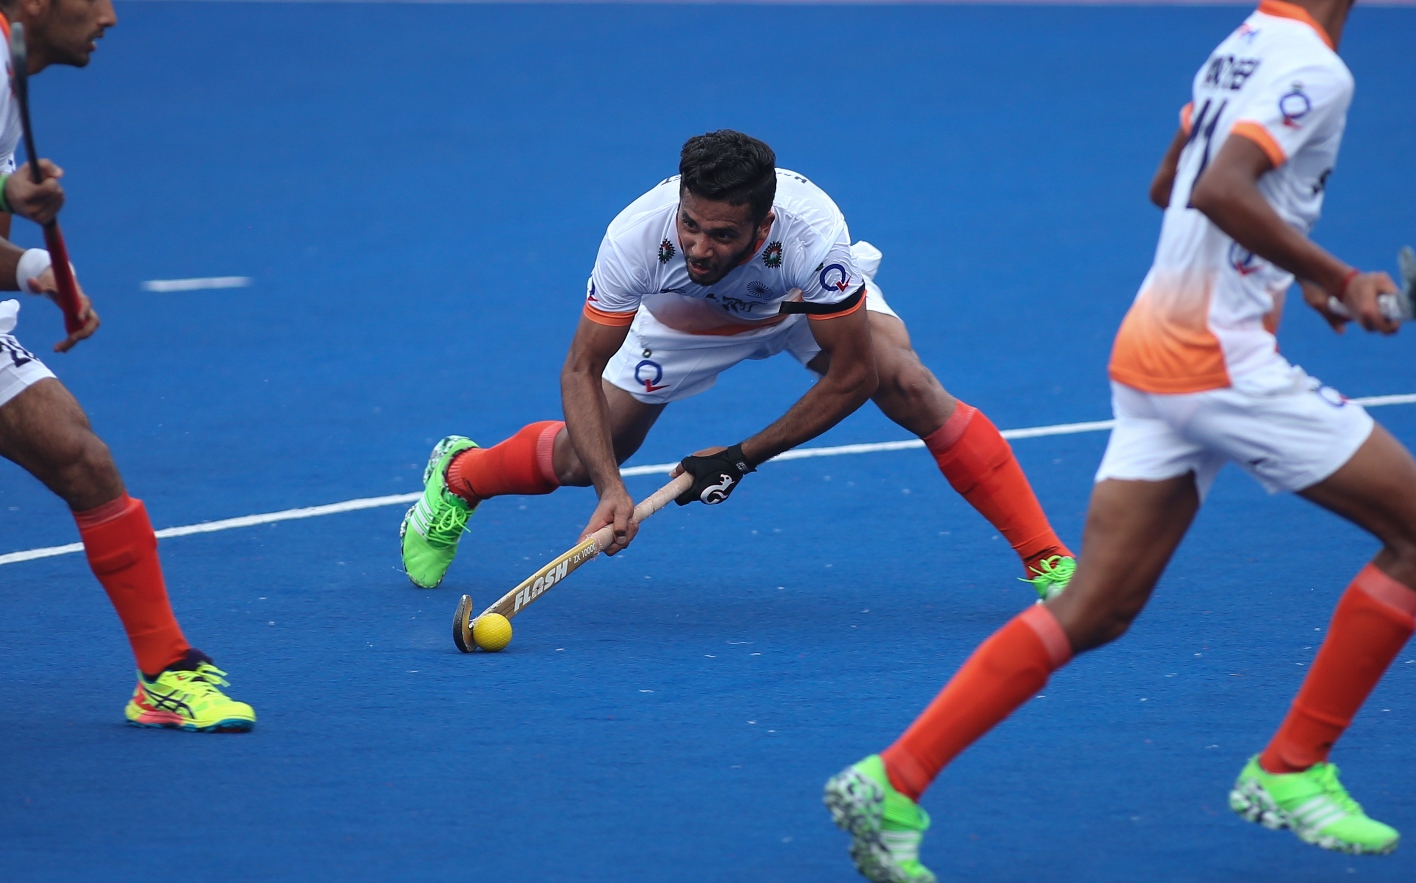 Hockey | India beat the Netherlands 2-1 to sweep series 2-0